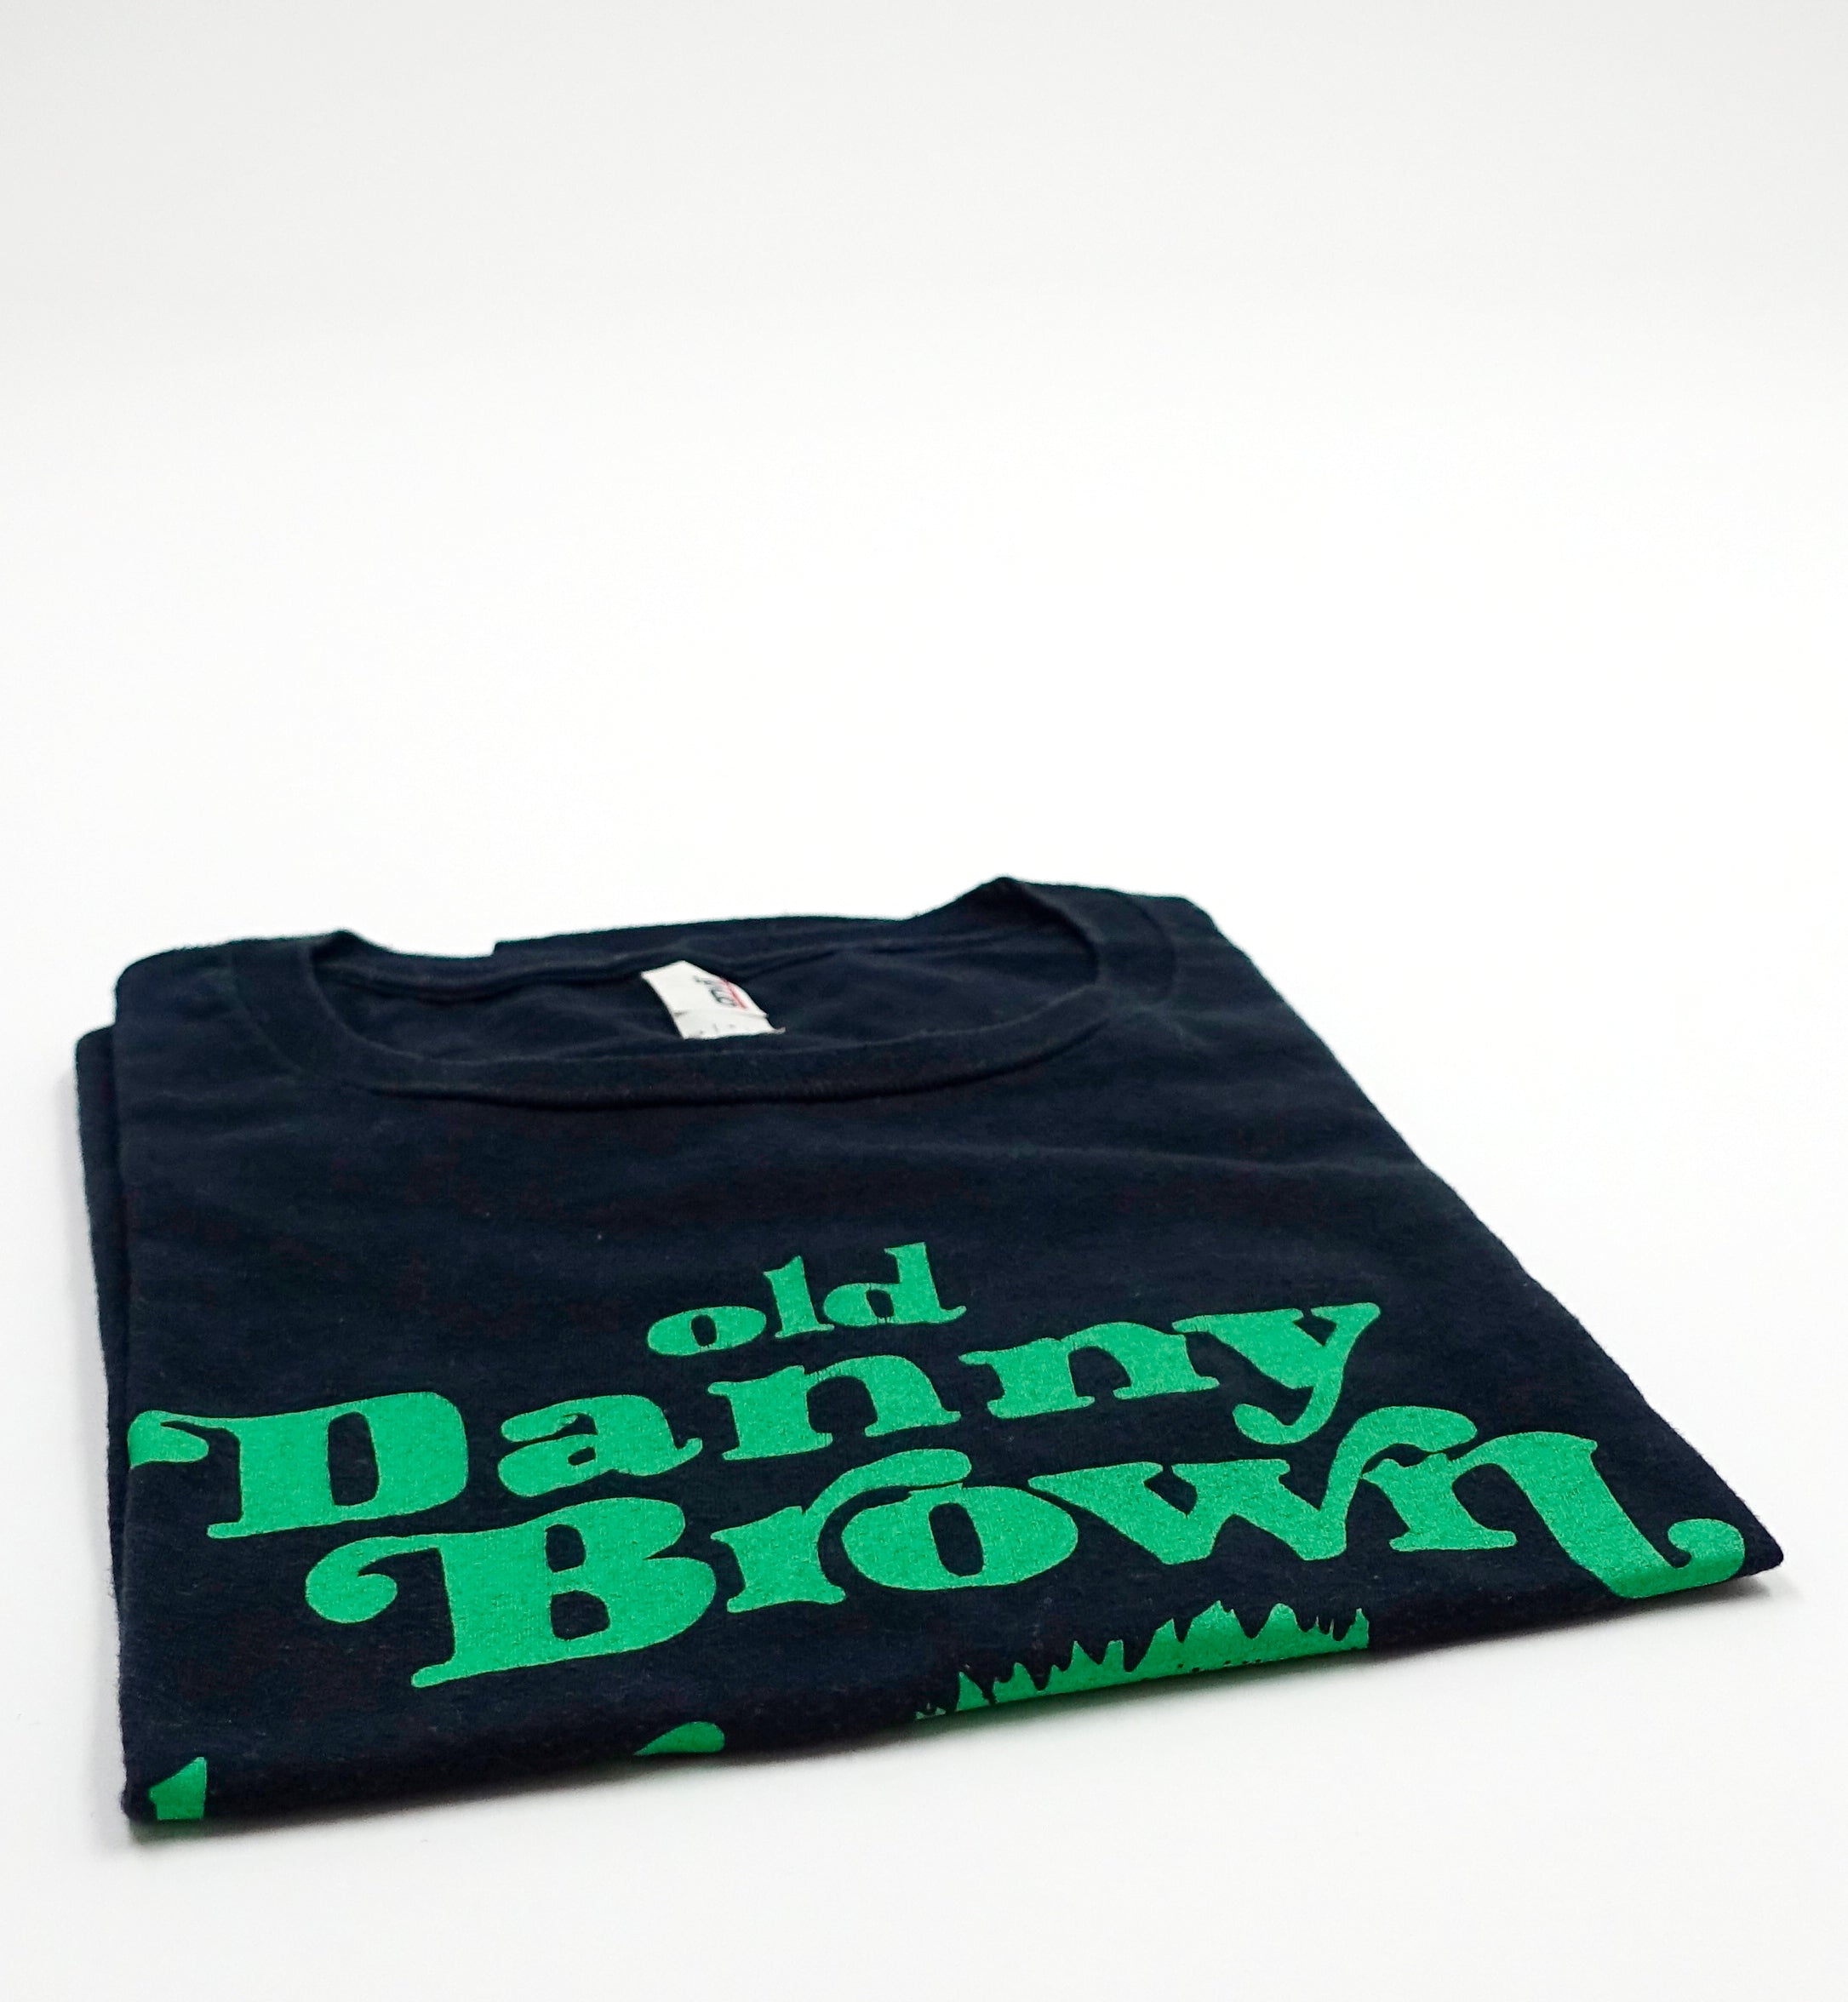 Danny Brown - Troll Doll Old 2014 North American Tour Shirt Size Large